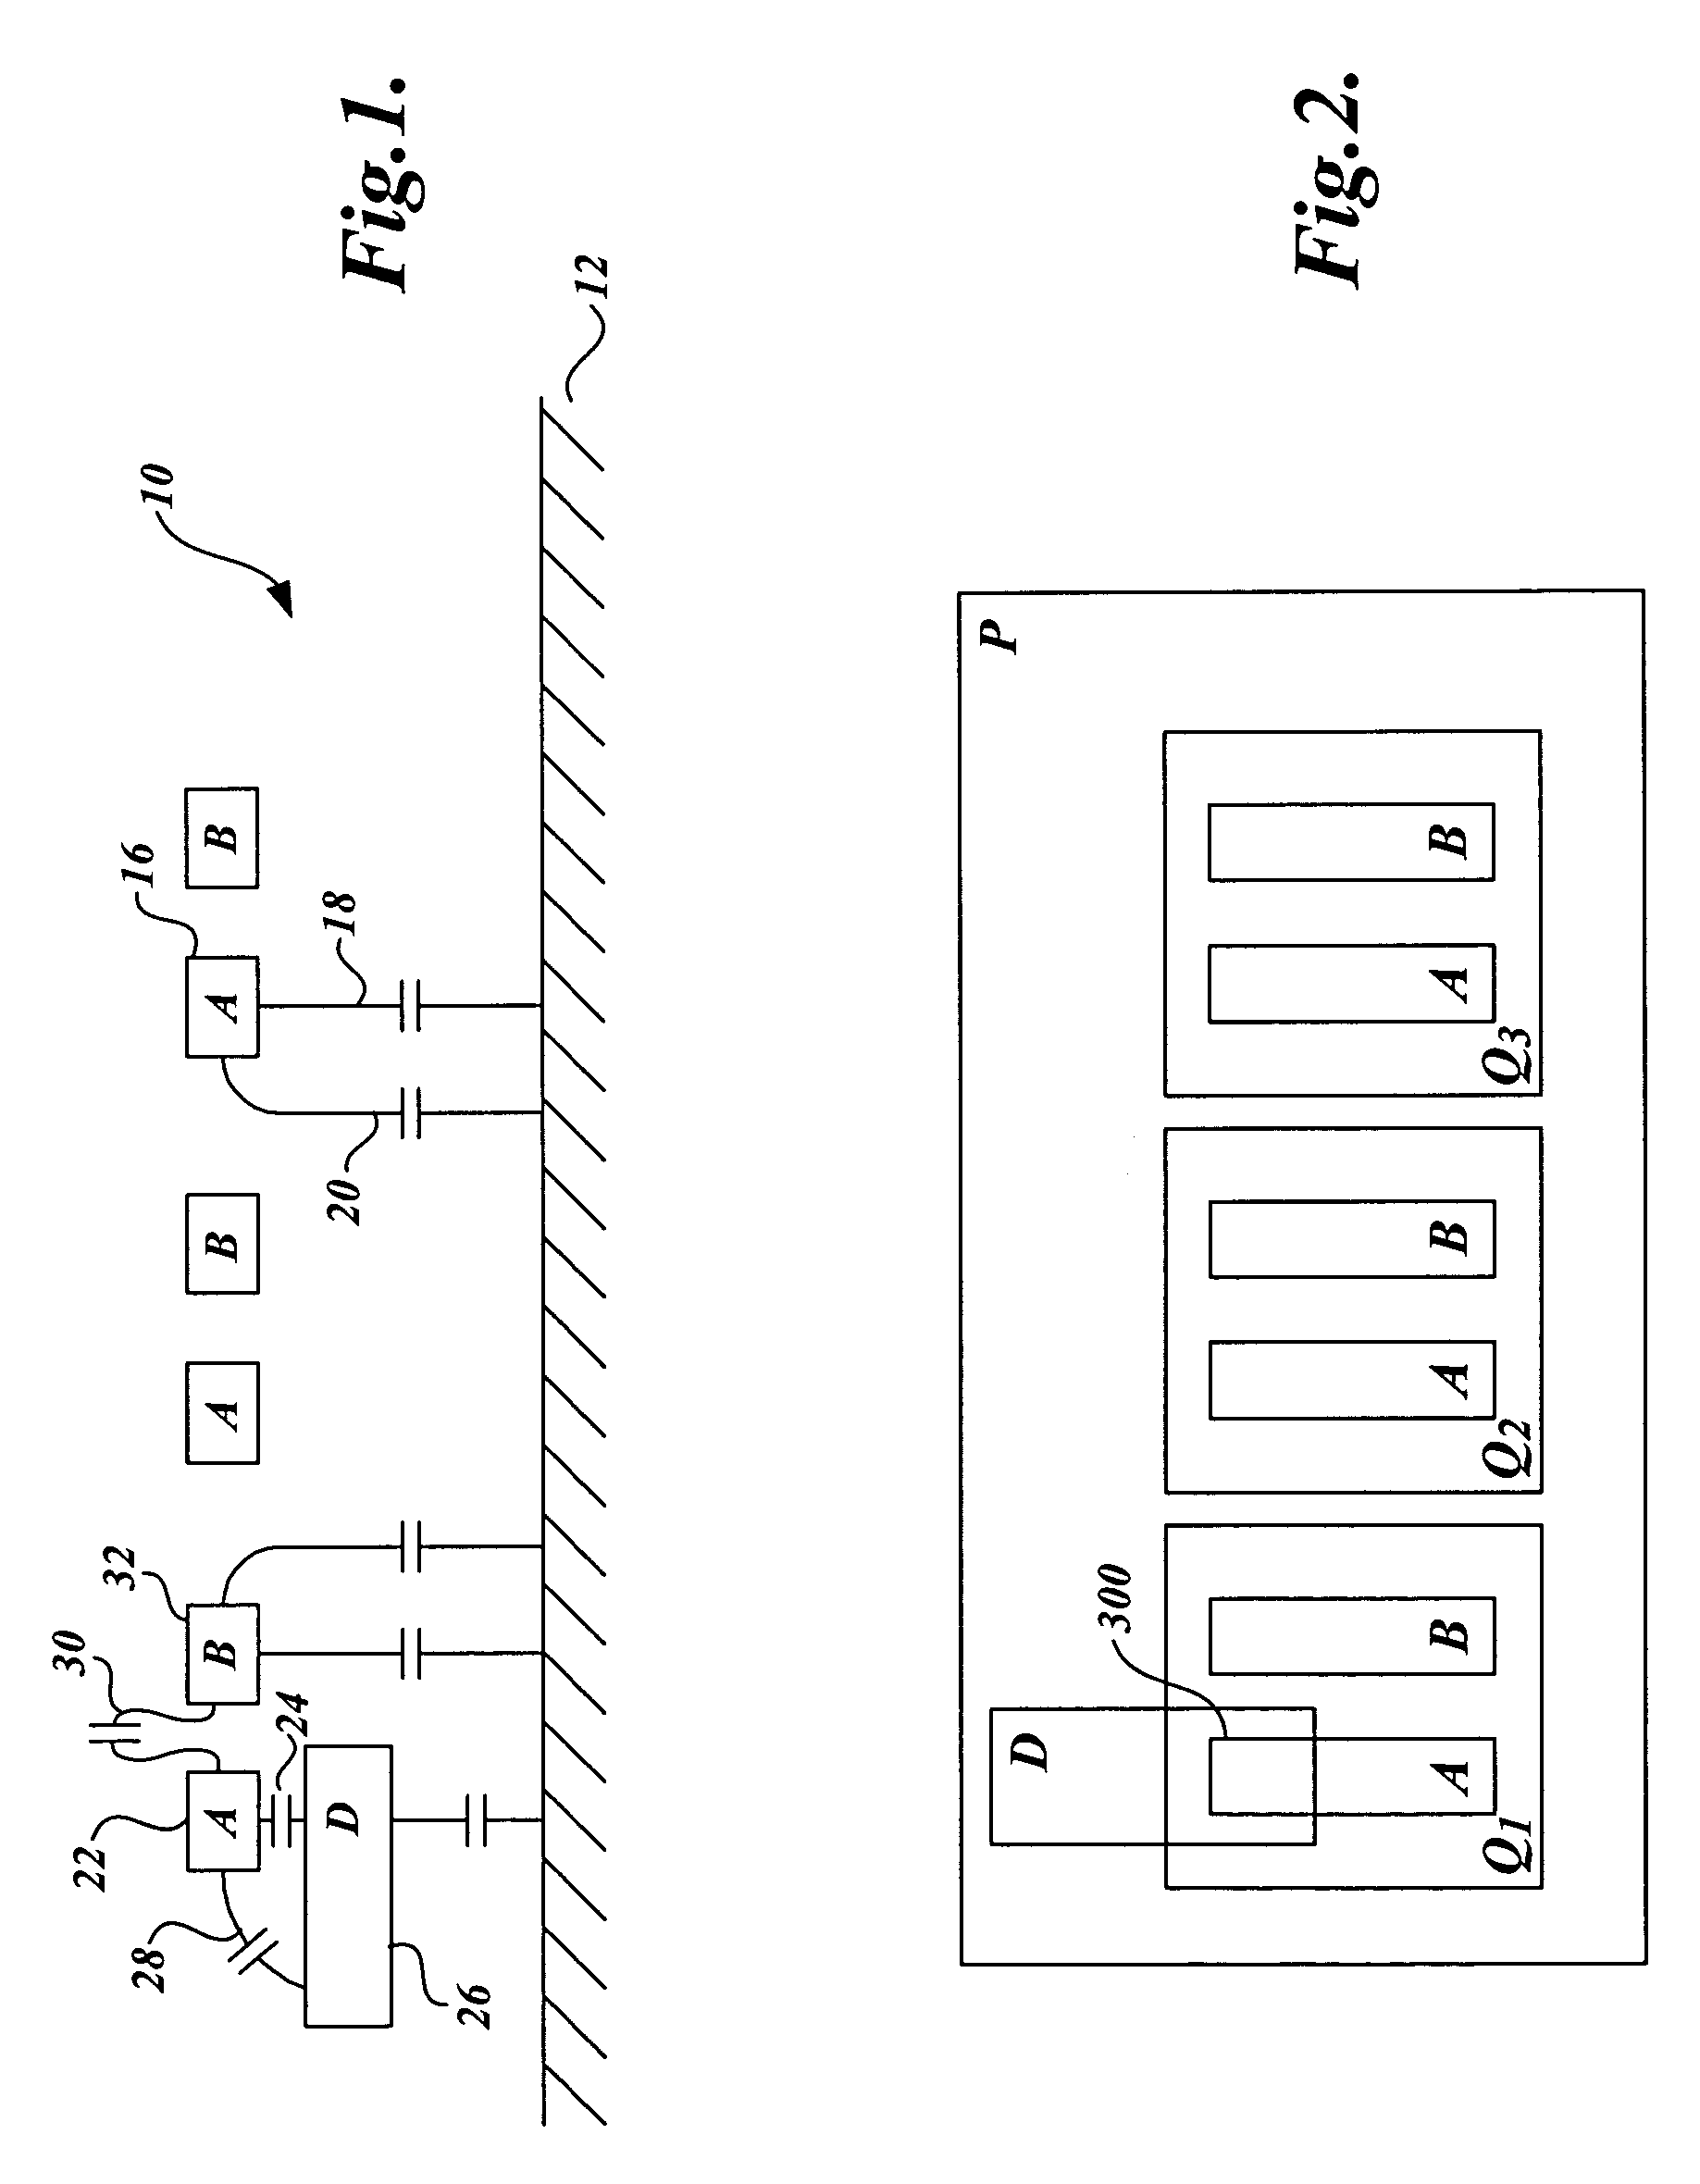 Hierarchical feature extraction for electrical interaction